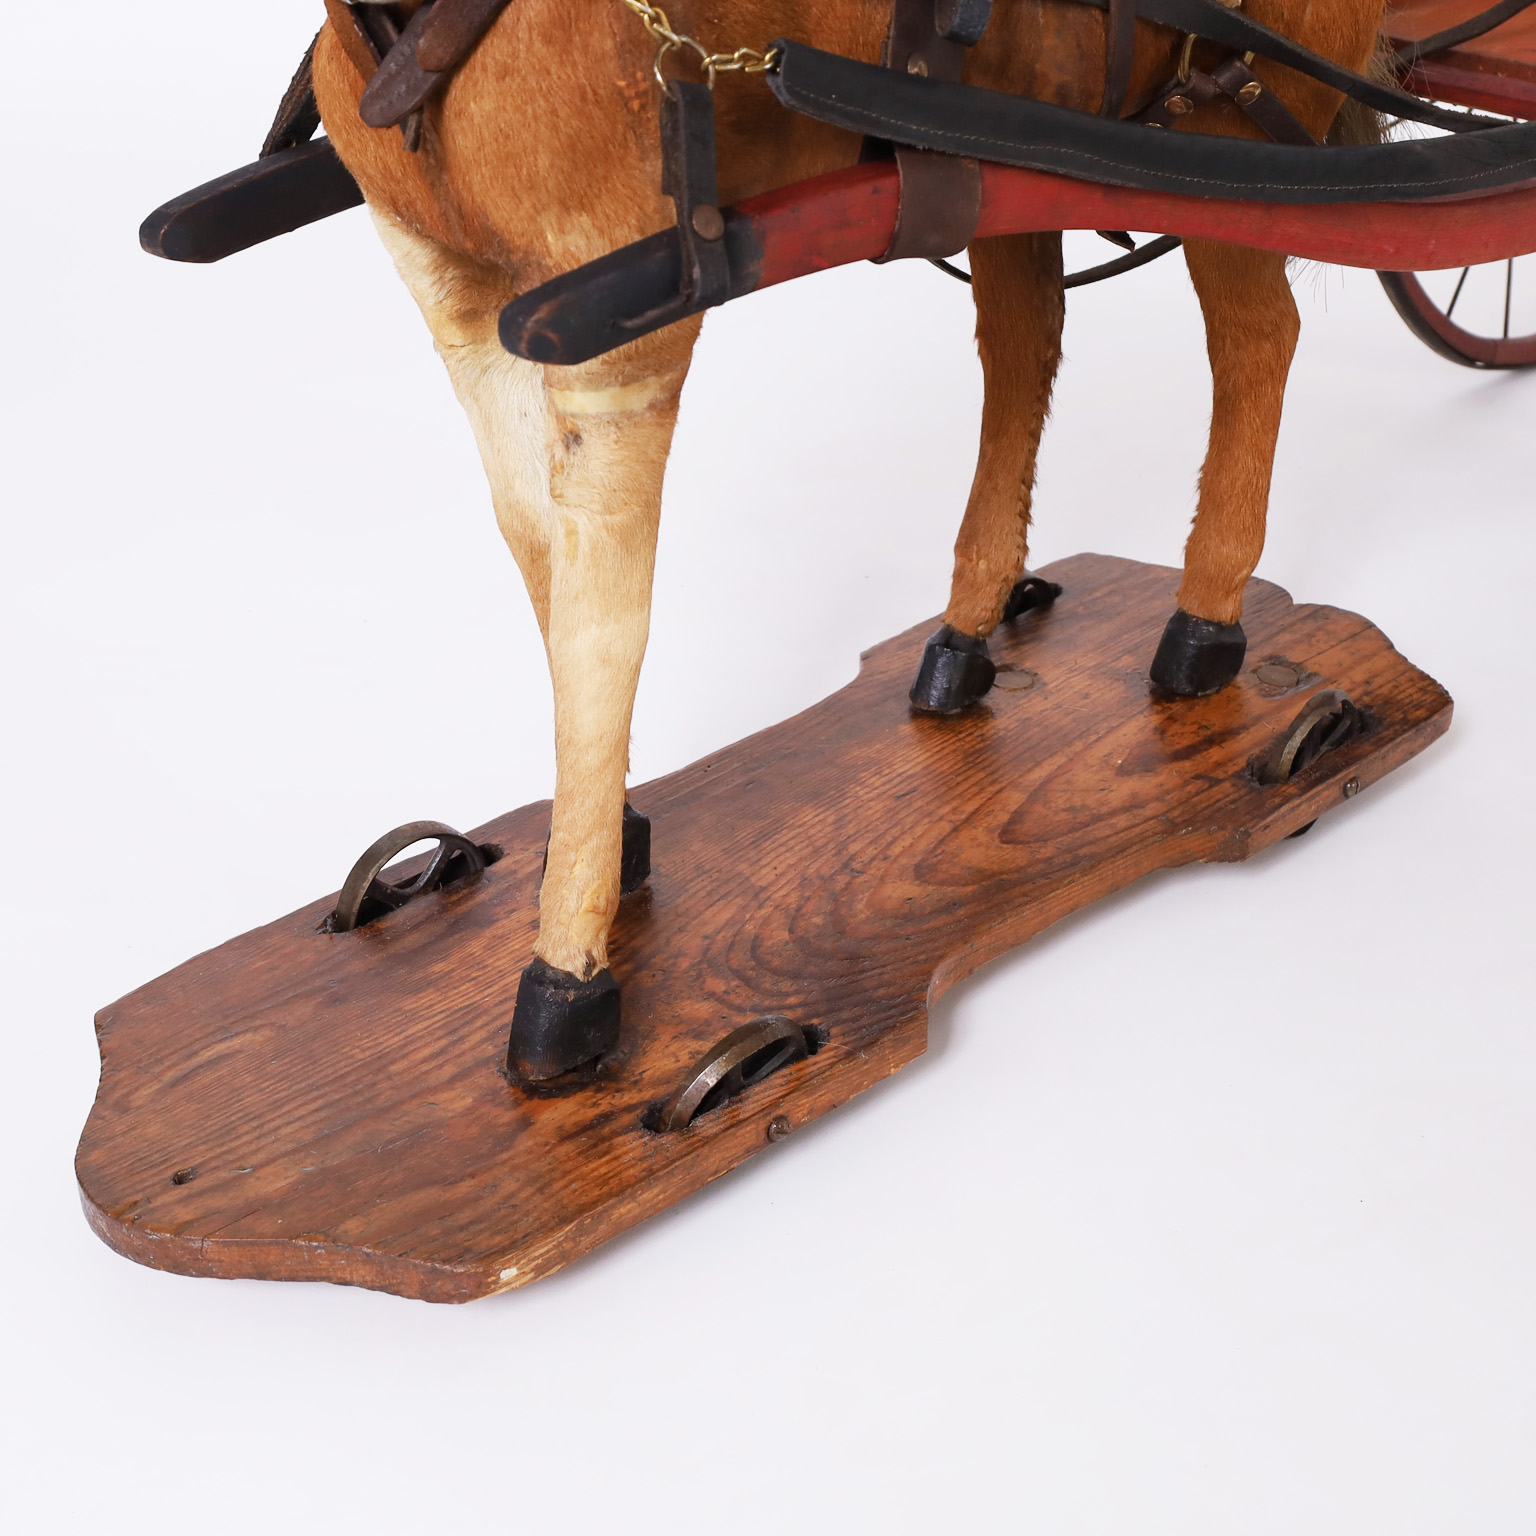 Large Vintage Toy Horse and Cart